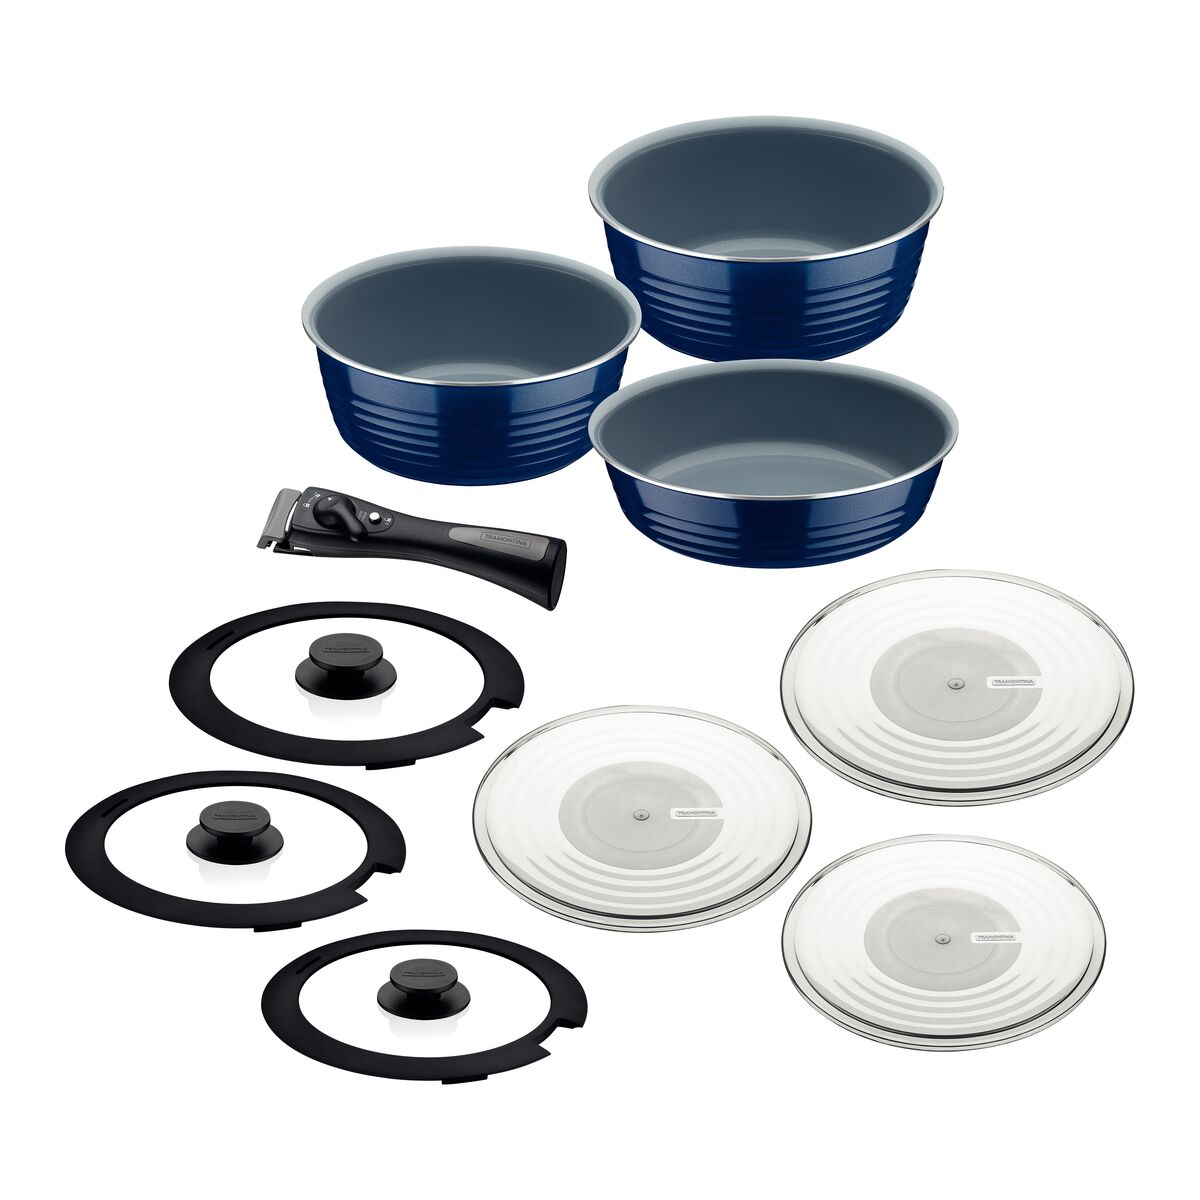 Tramontina Itria 10-Piece Multipurpose Blue Aluminum Cookware Set with Ceramic Coating and Removable Handle